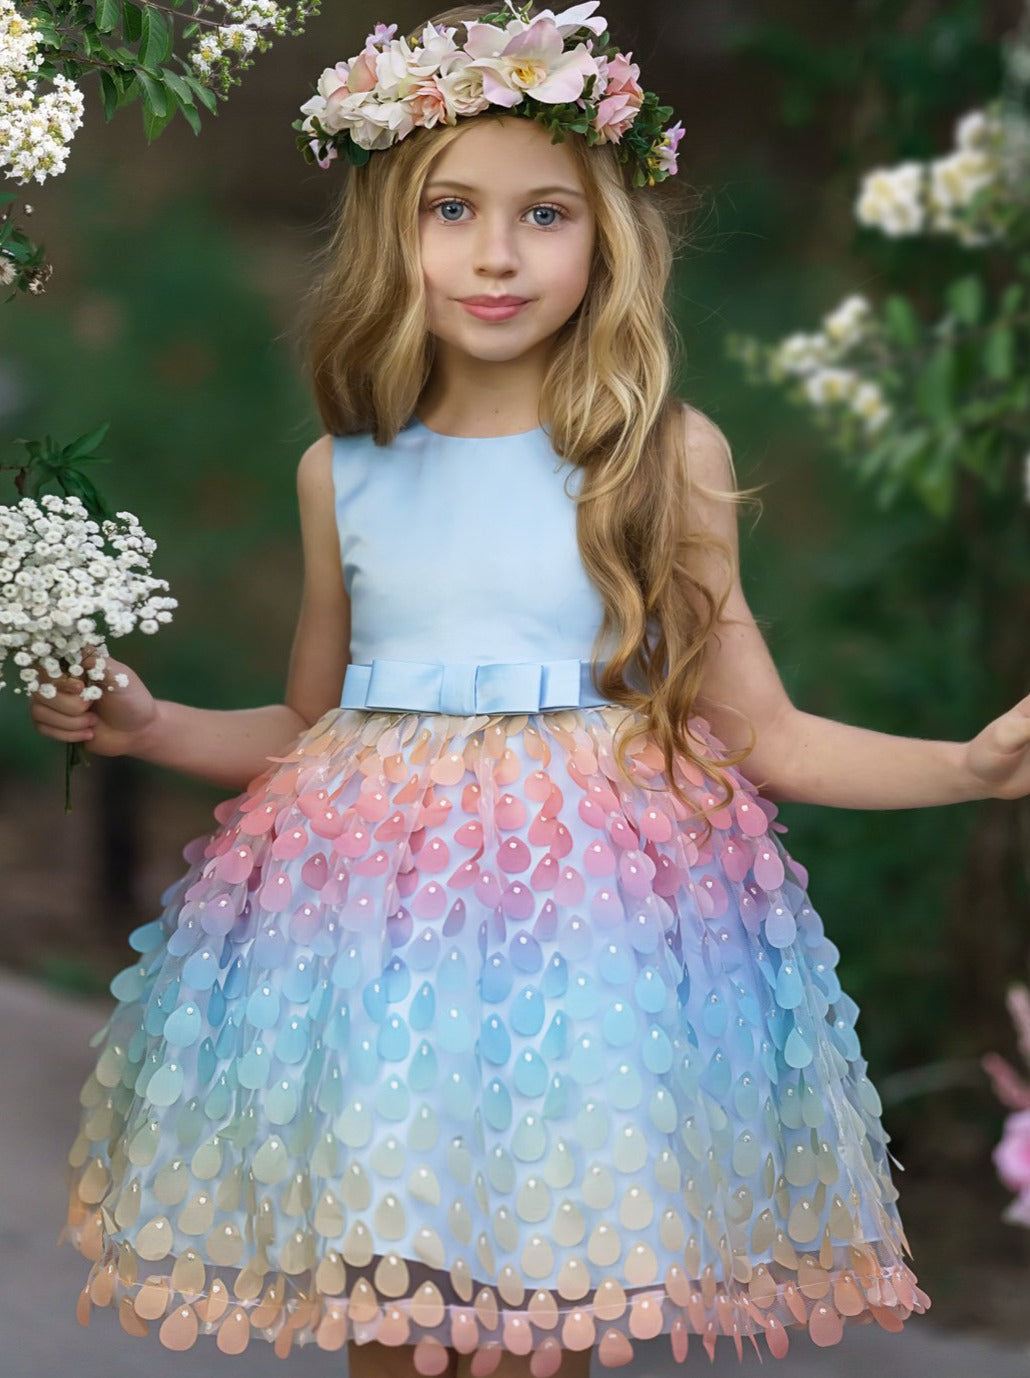 2022 Summer Rainbow Dress Kid Pastel Party Dress Fashion Princess Pleated  Dress Maid Girl Costume Cute Kids Belle Clothing From Fashionstype, $14.14